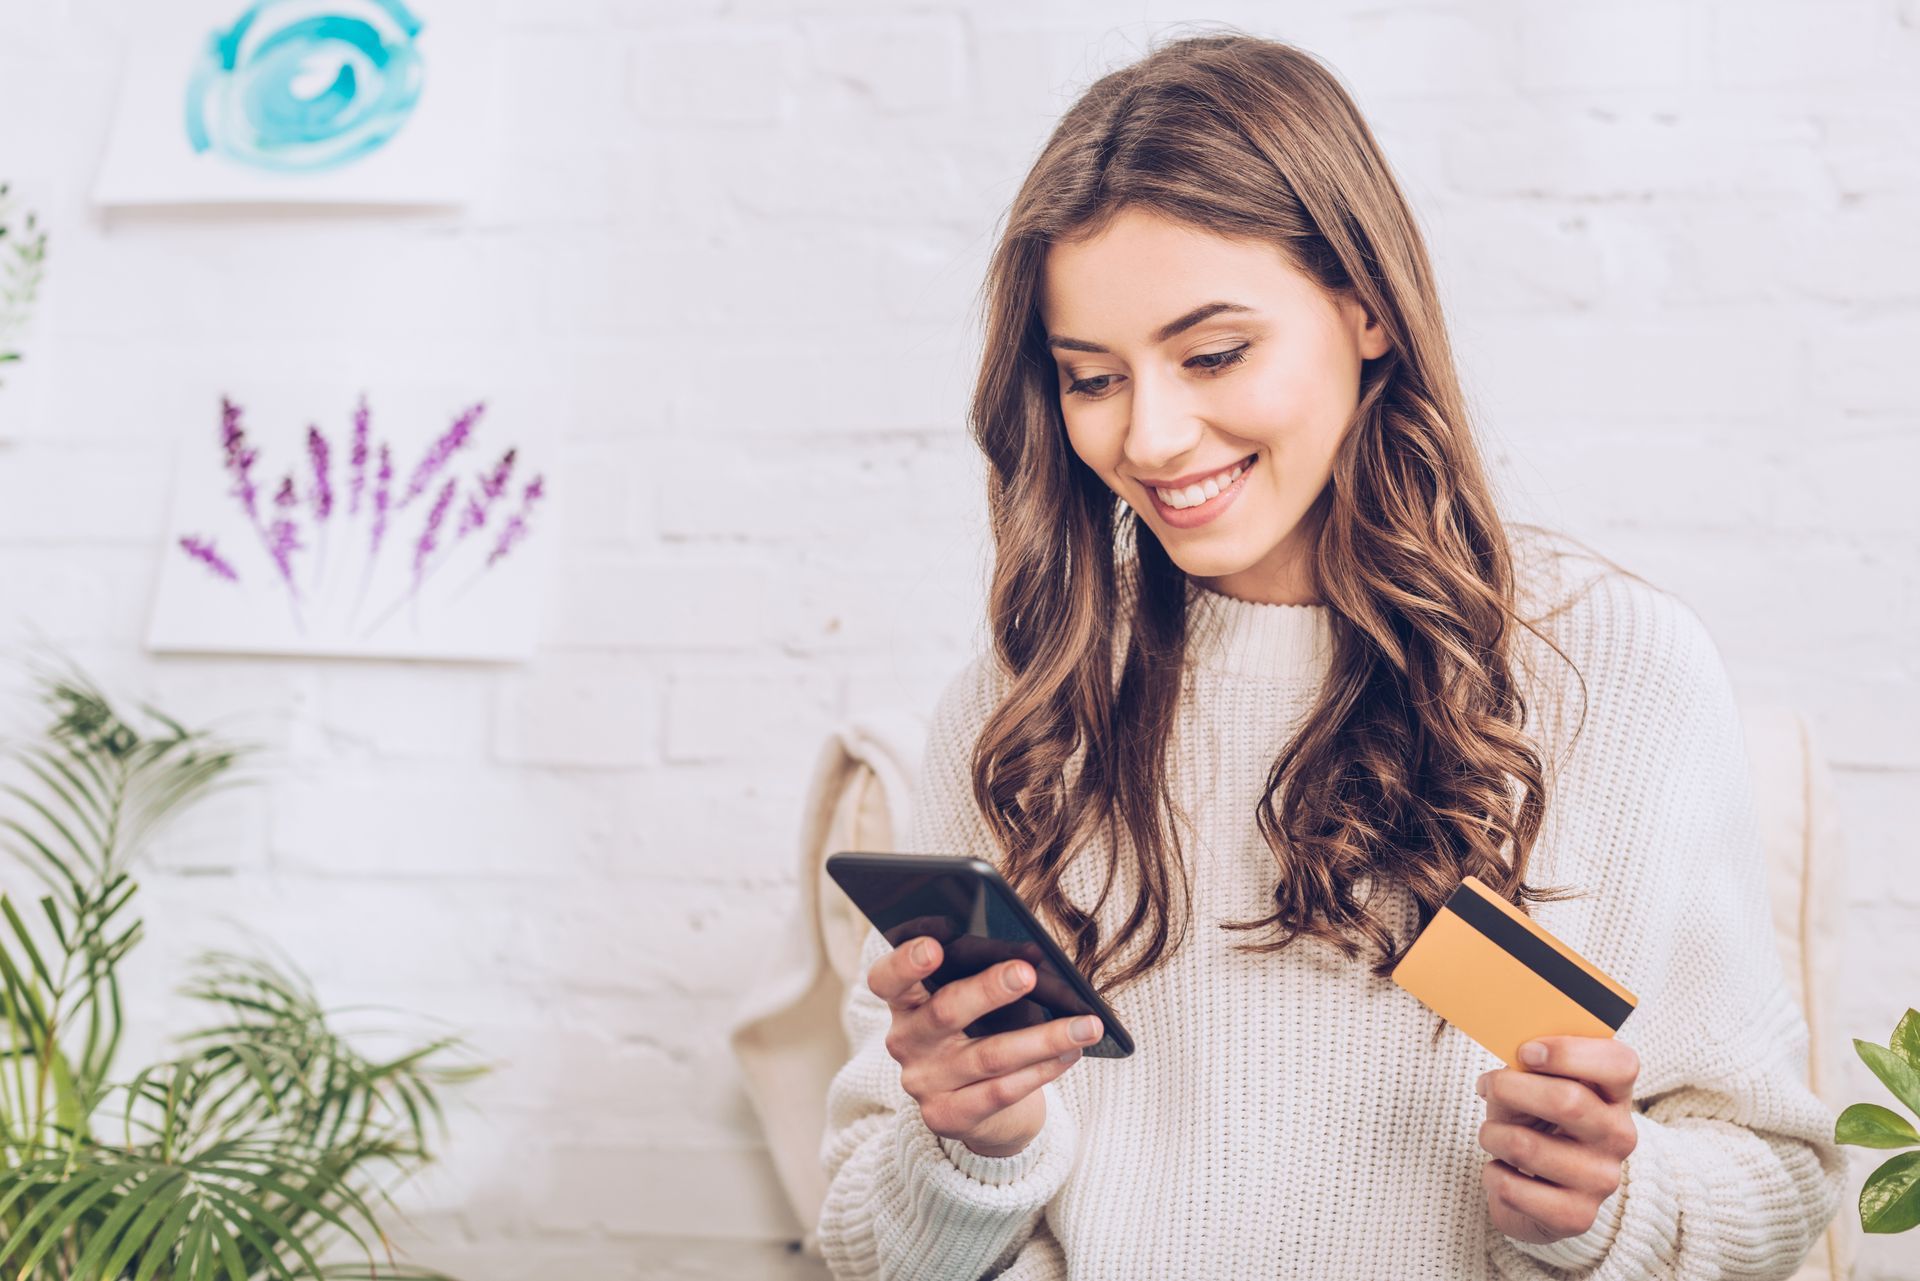 Smiling woman holding a credit card and a cell phone signing up for online membership and the benefits of special offers